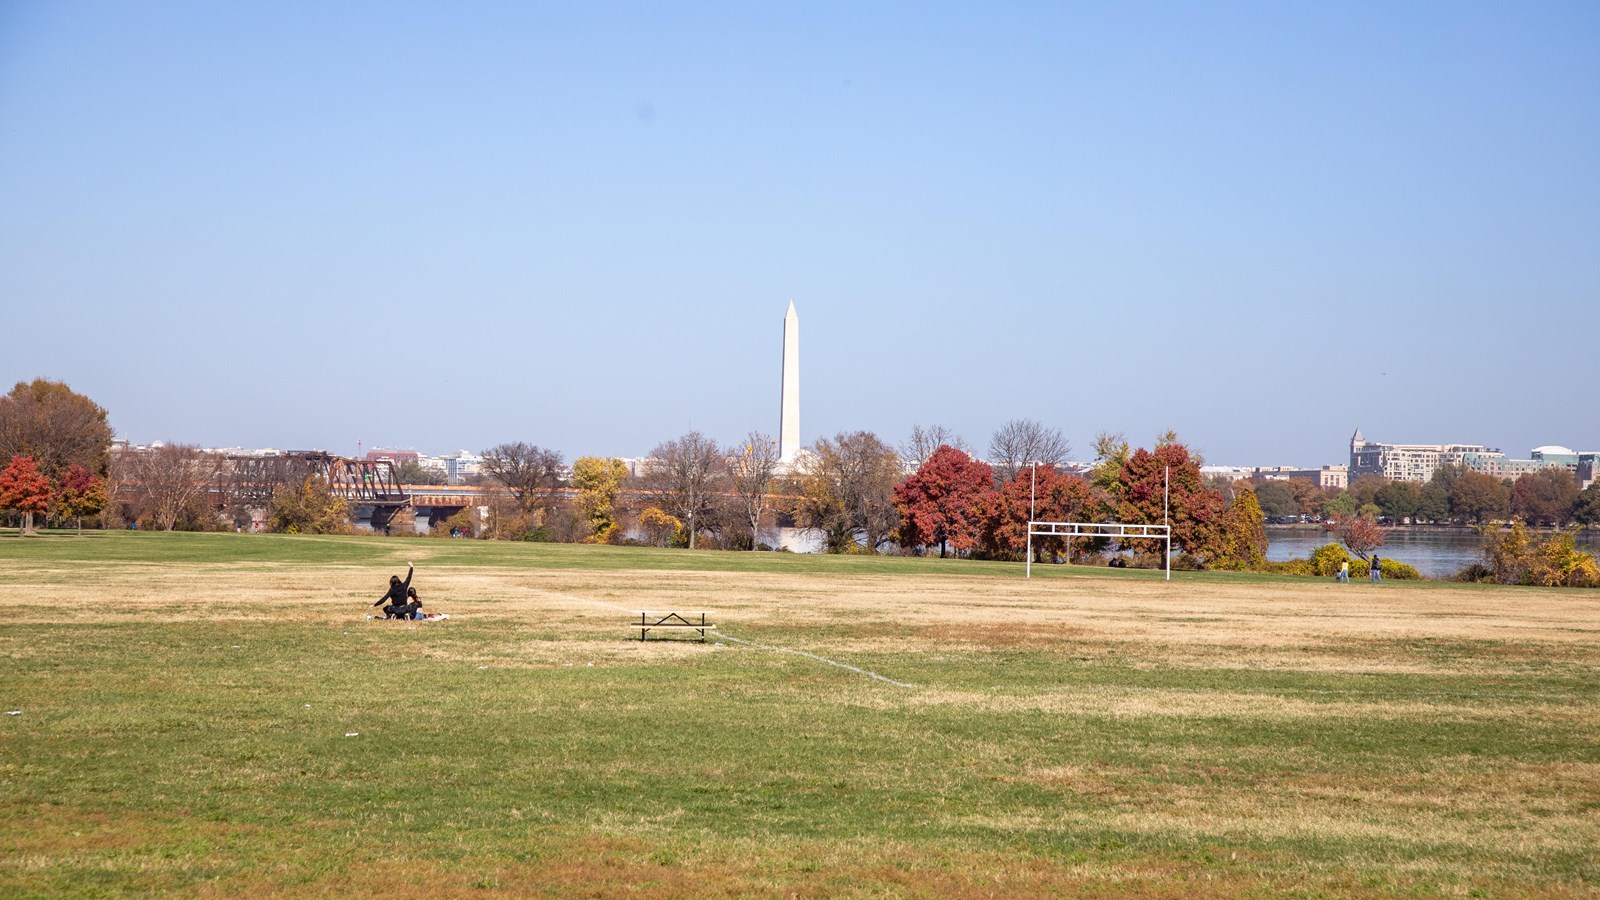 A wide open field with the washington monument in the distance